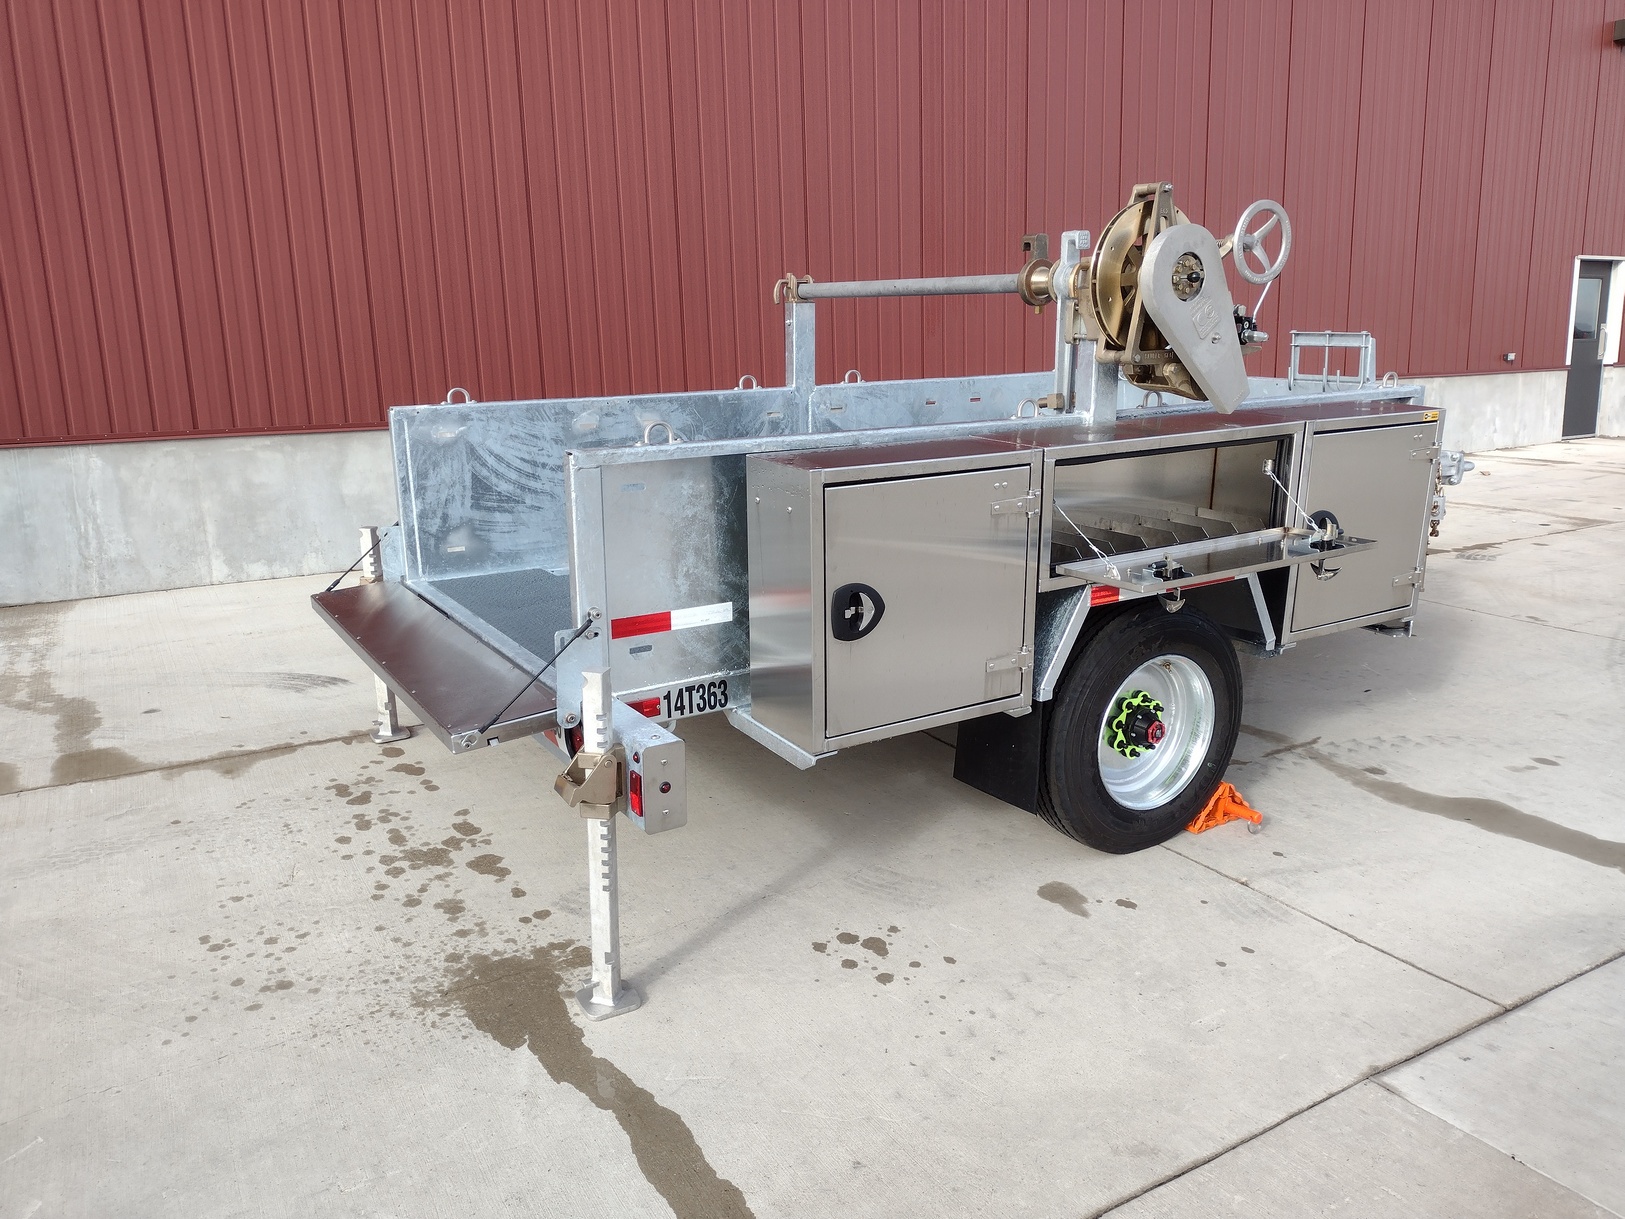 Right side view from rear of a Sauber Model 1560 Reel Cargo Trailer with galvanized finish on concrete in front of a red metal building.